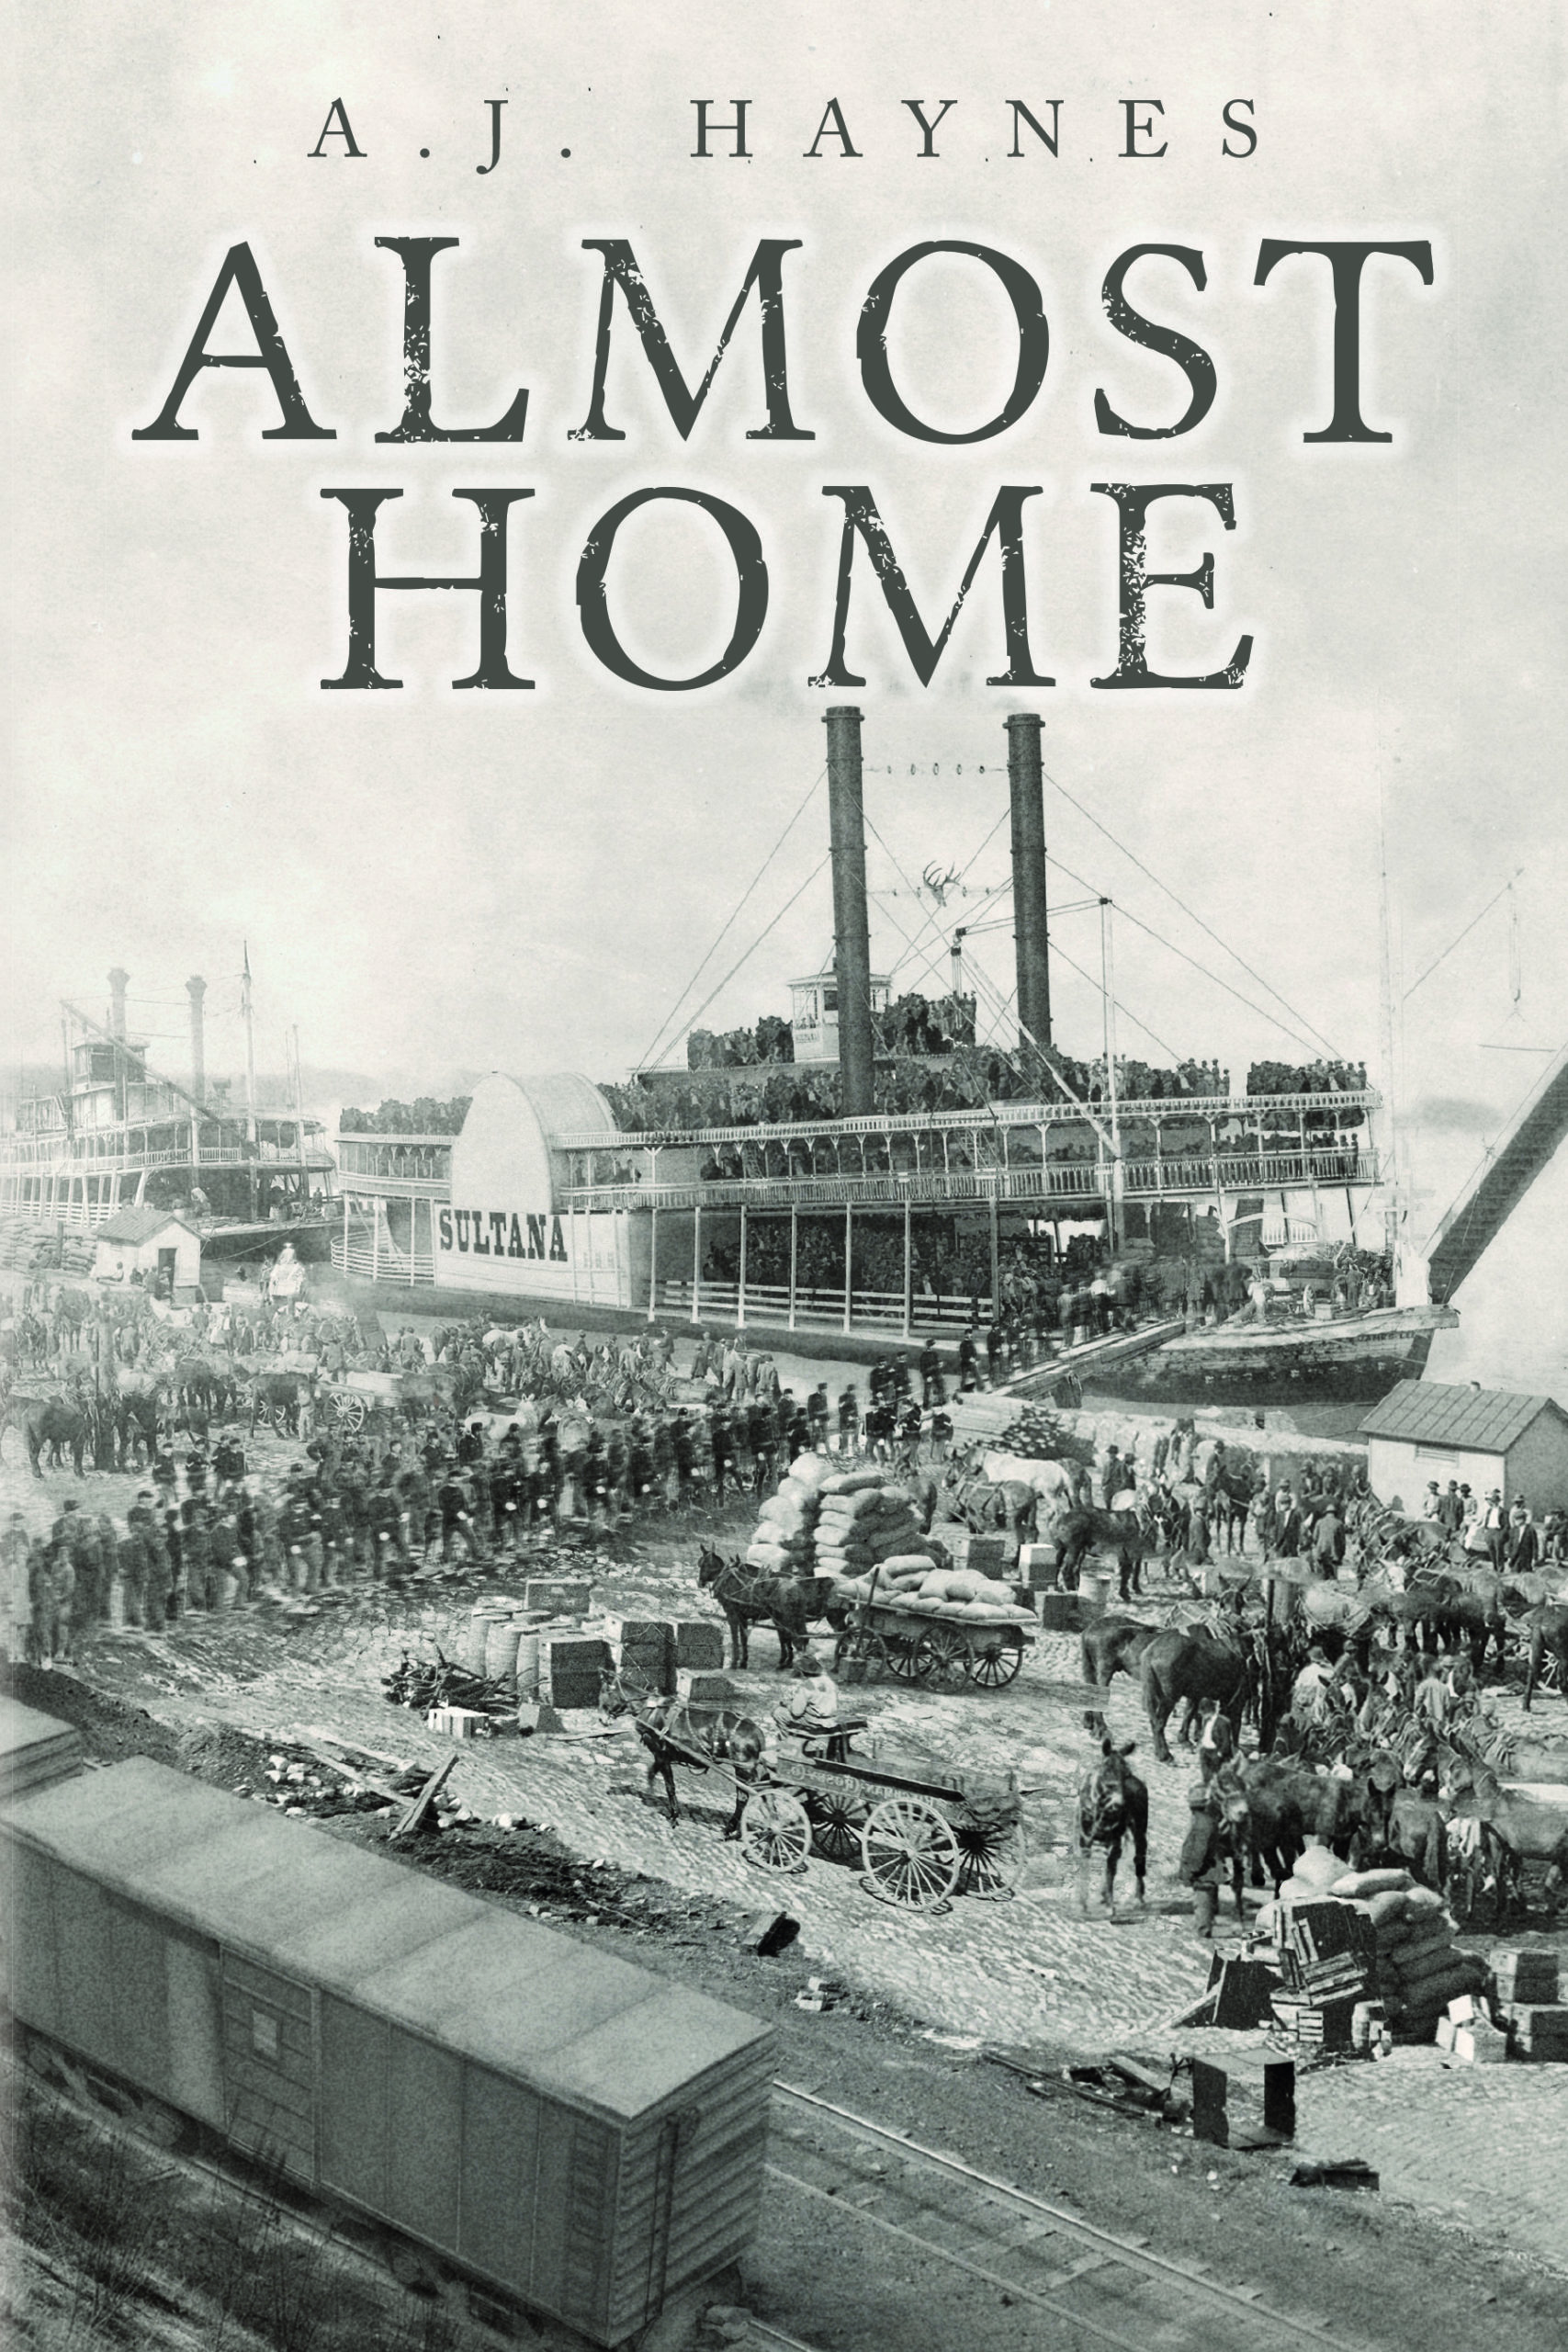 Almost Home by A. J. Haynes